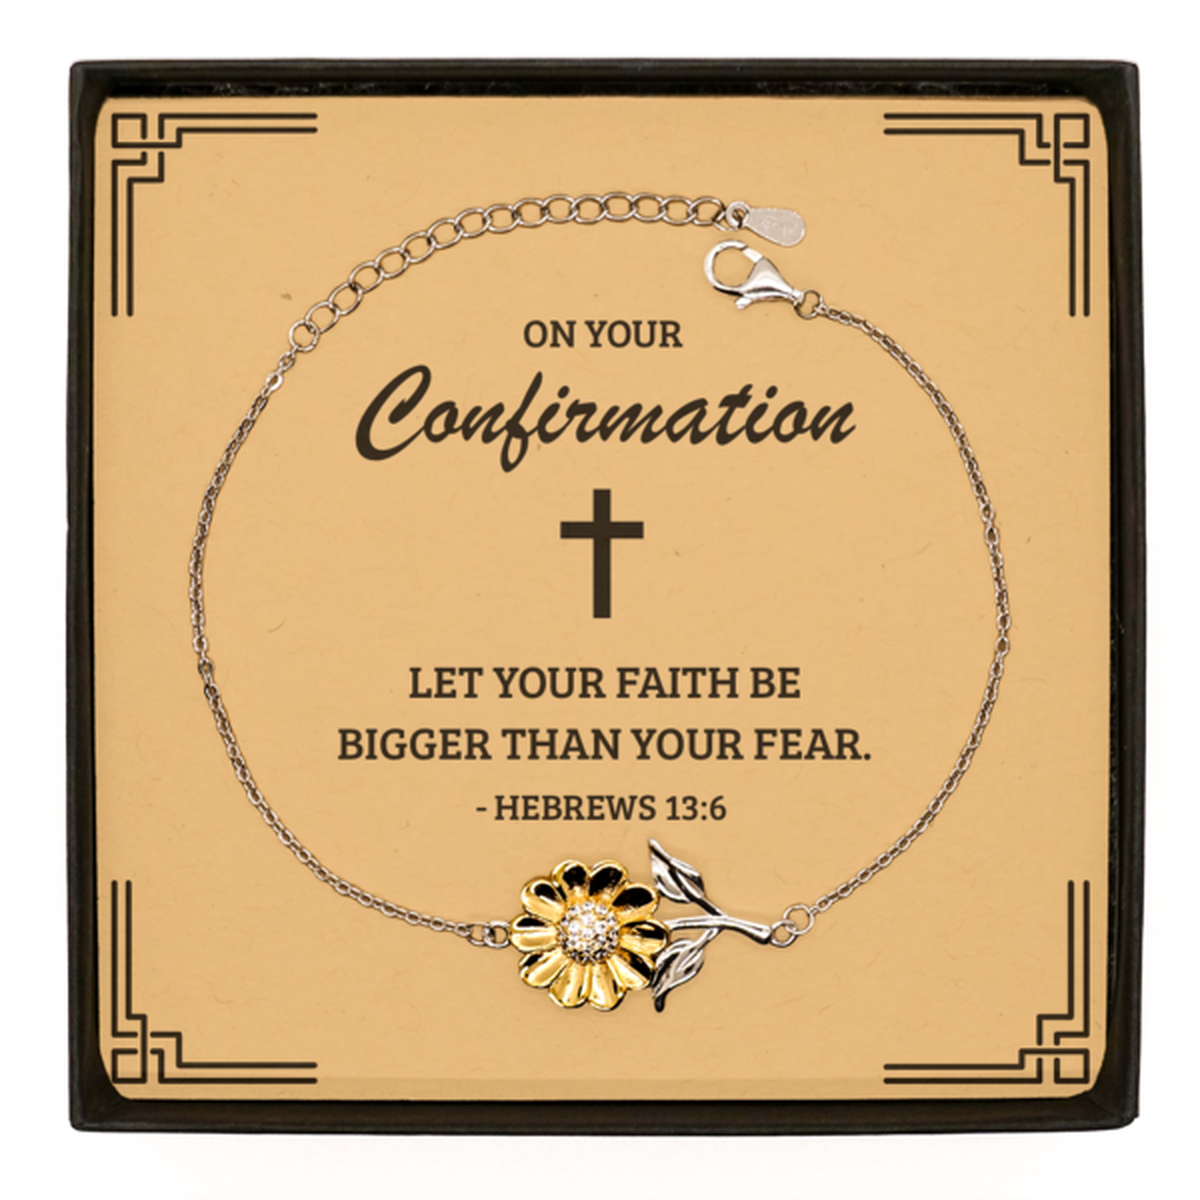 Confirmation Gifts for Teenage Girls, Let your faith be bigger than your fear, .925 Sterling Silver Sunflower Bracelet with Bible Verse Message Card, Religious Catholic Bracelet for Daughter, Granddaughter